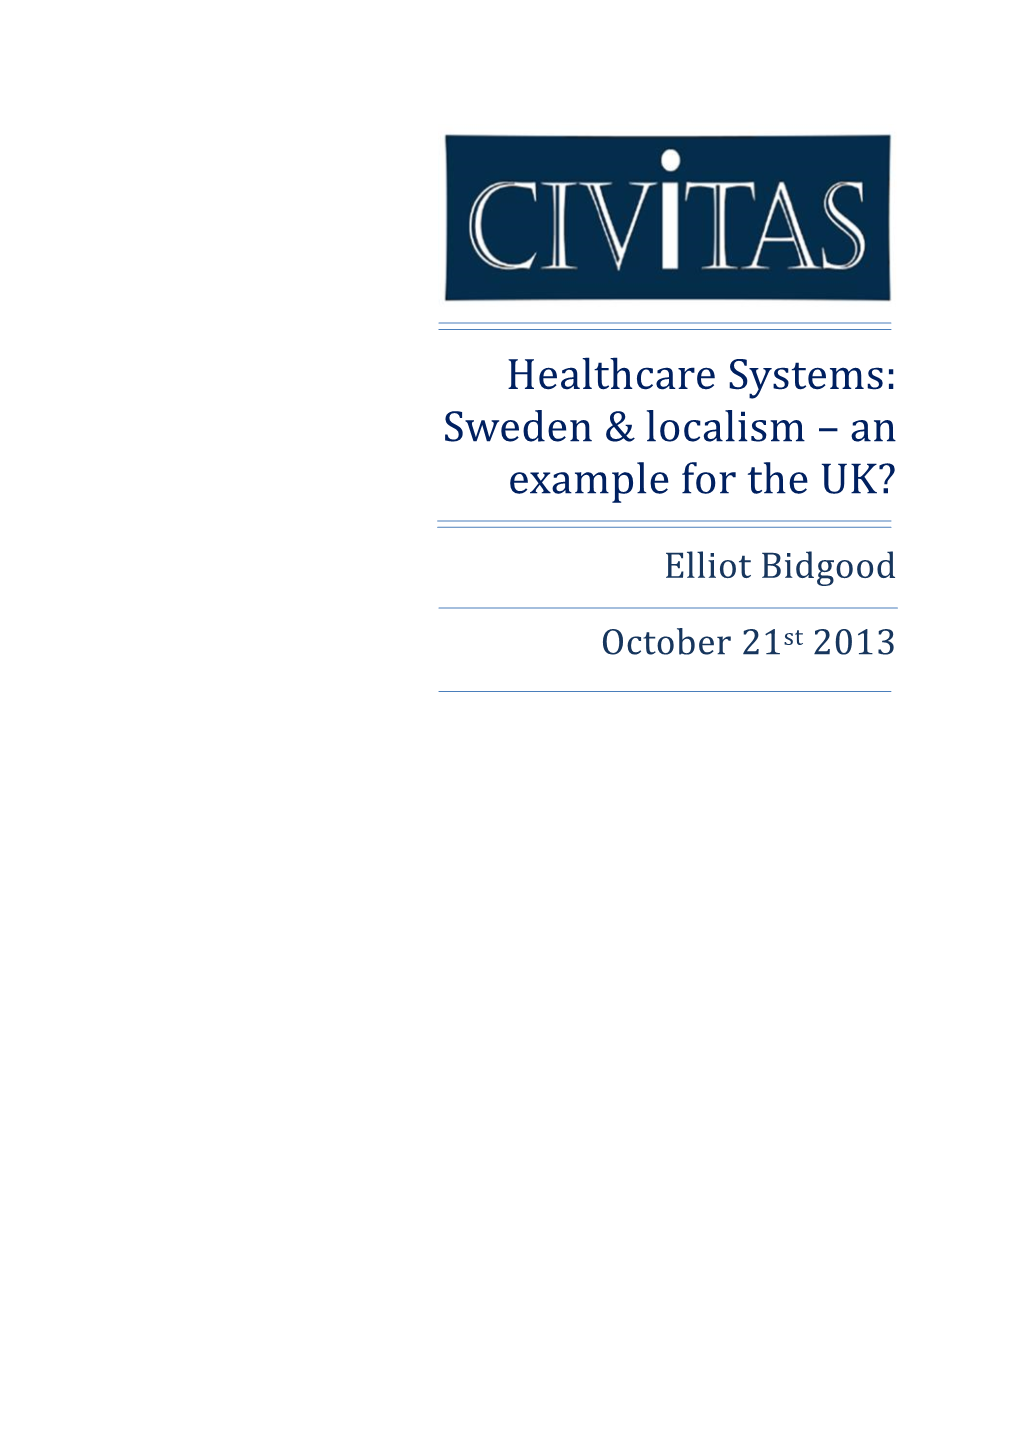 Healthcare Systems: Sweden & Localism